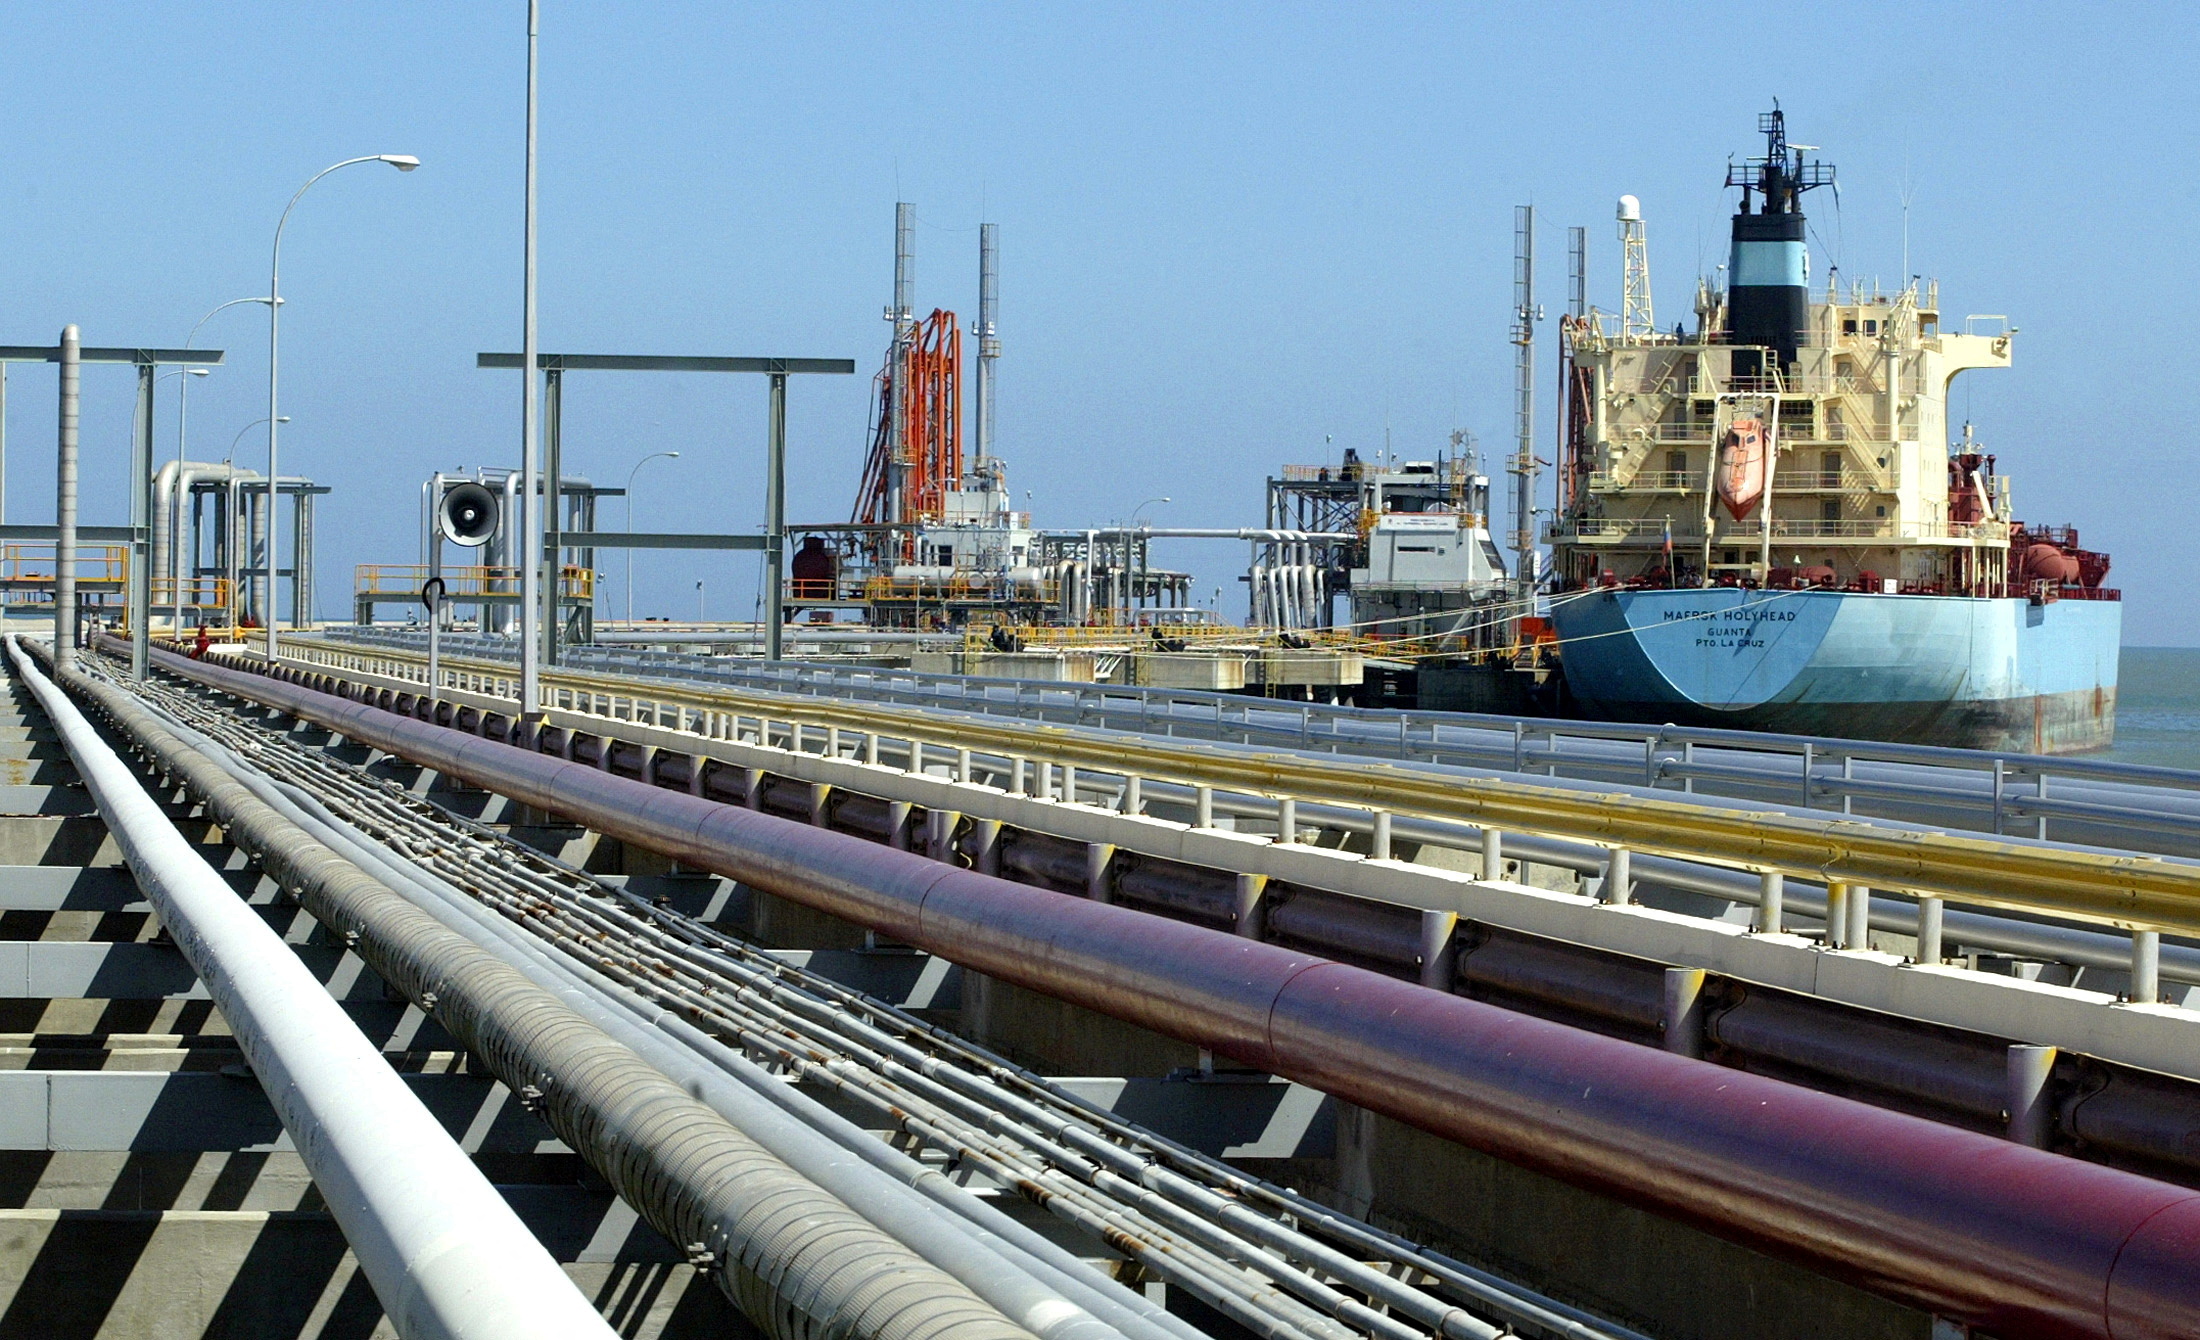 An oil tanker is seen at Jose refinery cargo terminal in Venezuela in this undated file photo